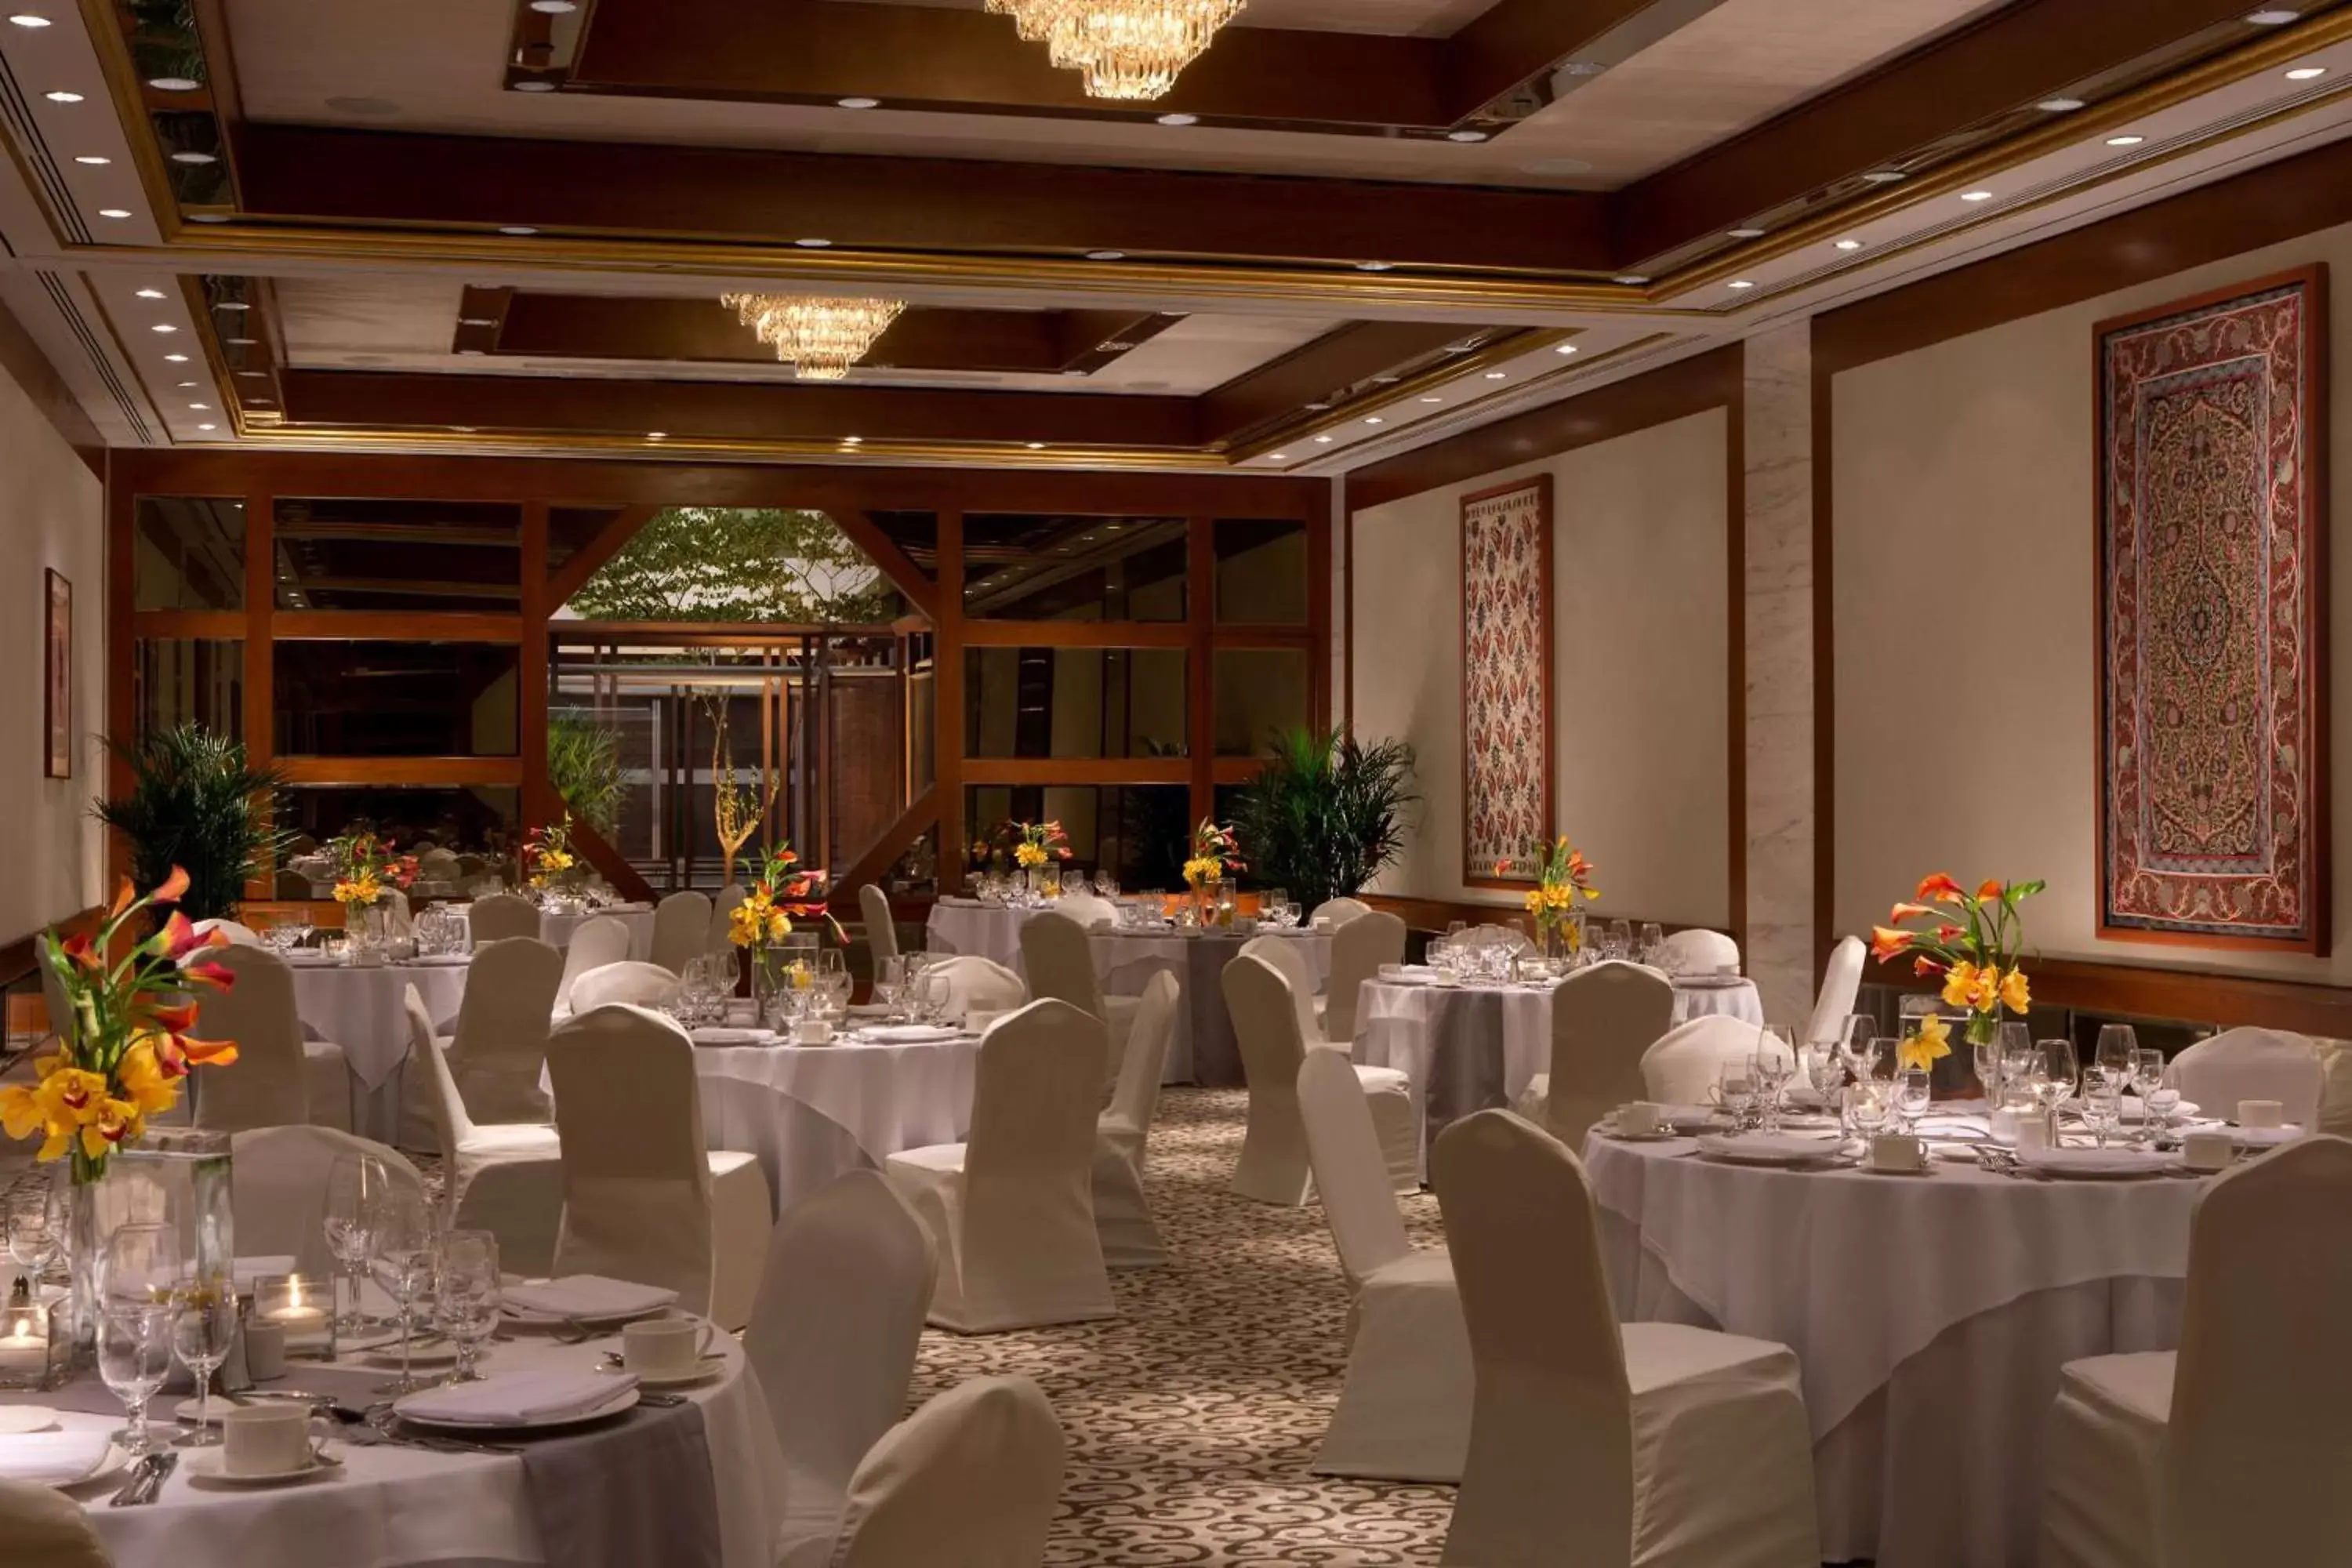 Meeting/conference room, Banquet Facilities in Millennium Hilton New York One UN Plaza